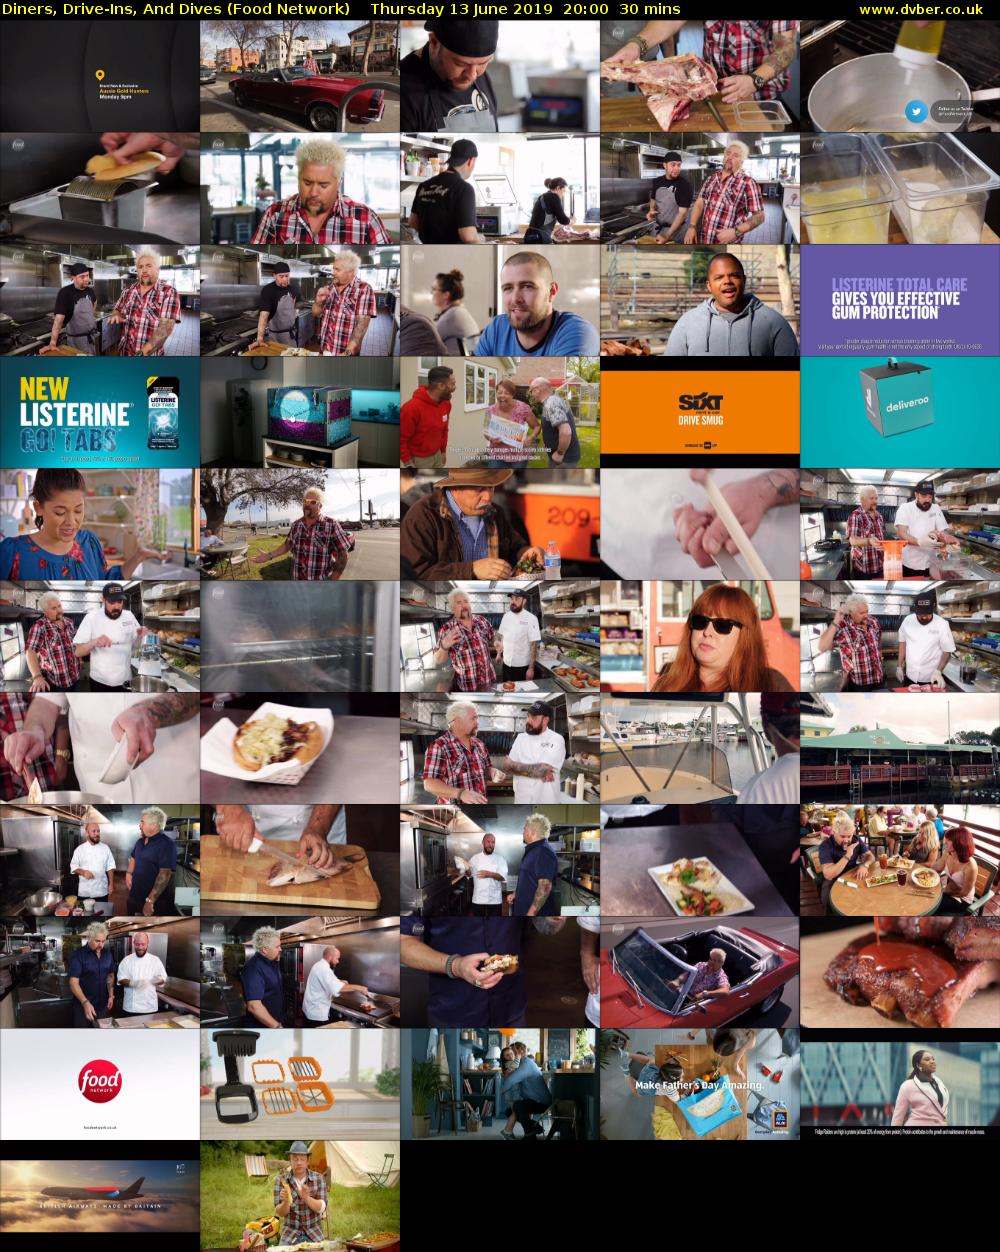 Diners, Drive-Ins, And Dives (Food Network) Thursday 13 June 2019 20:00 - 20:30